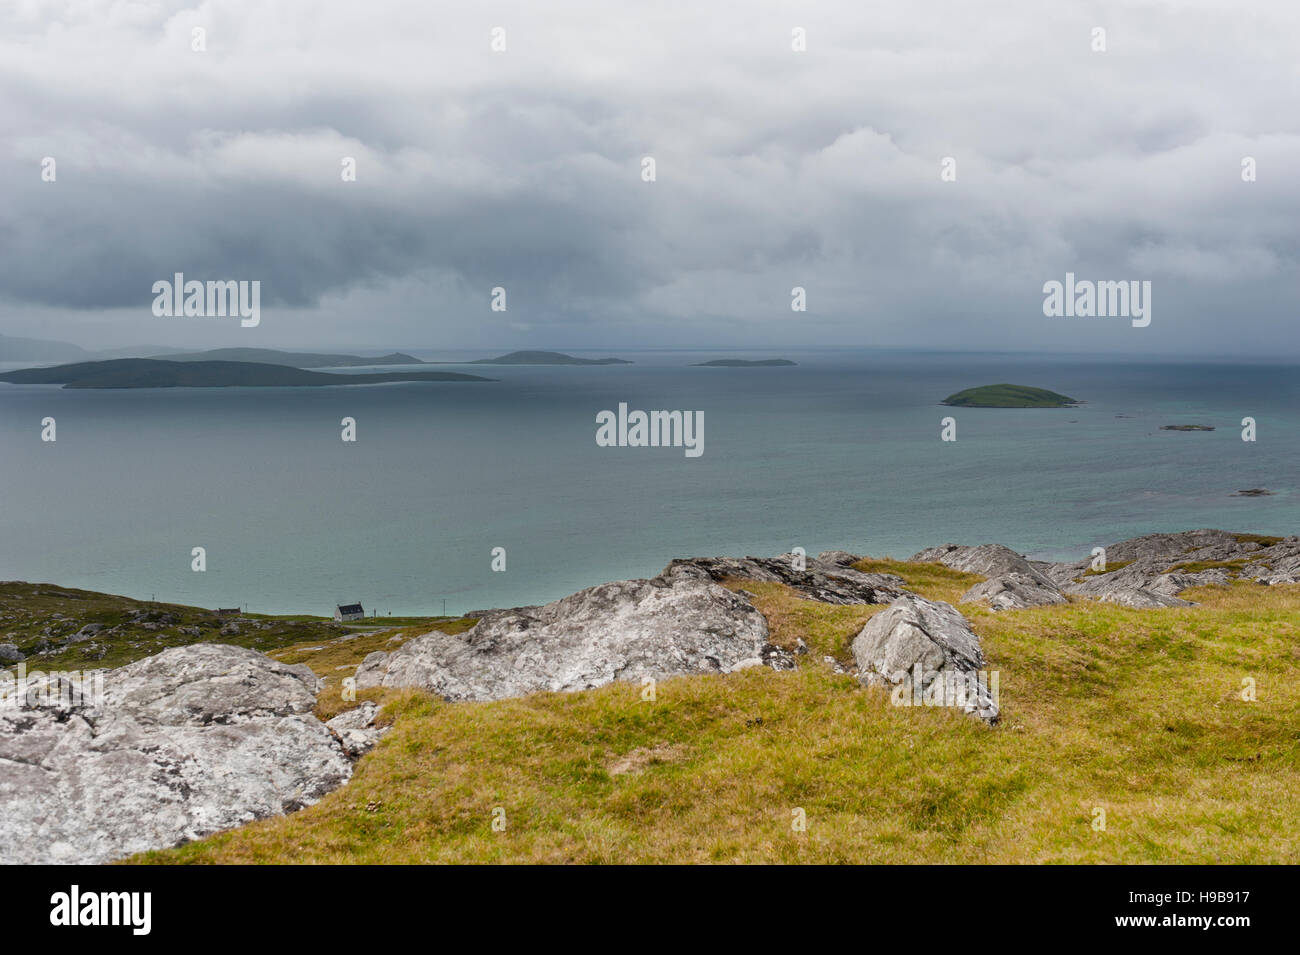 Grass and rocks, sea and islands, view from the mountain Beinn Sciathan, Atlantic, Isle of Eriskay, Outer Hebrides, Scotland Stock Photo